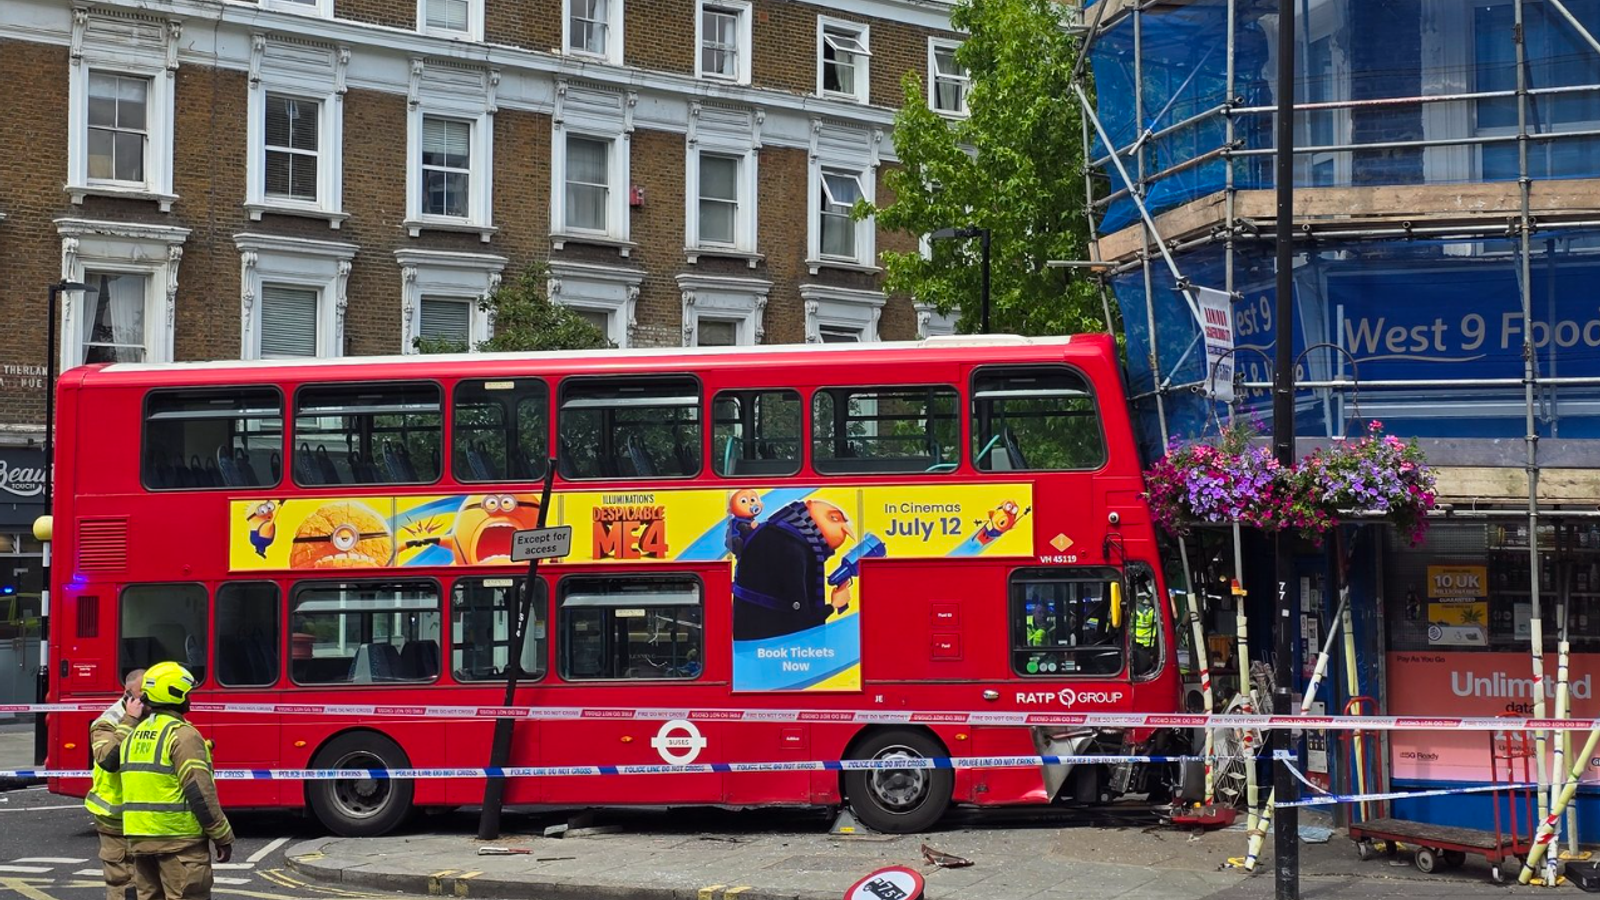 Six people injured after double-decker bus crashes into scaffolding in west London | UK News